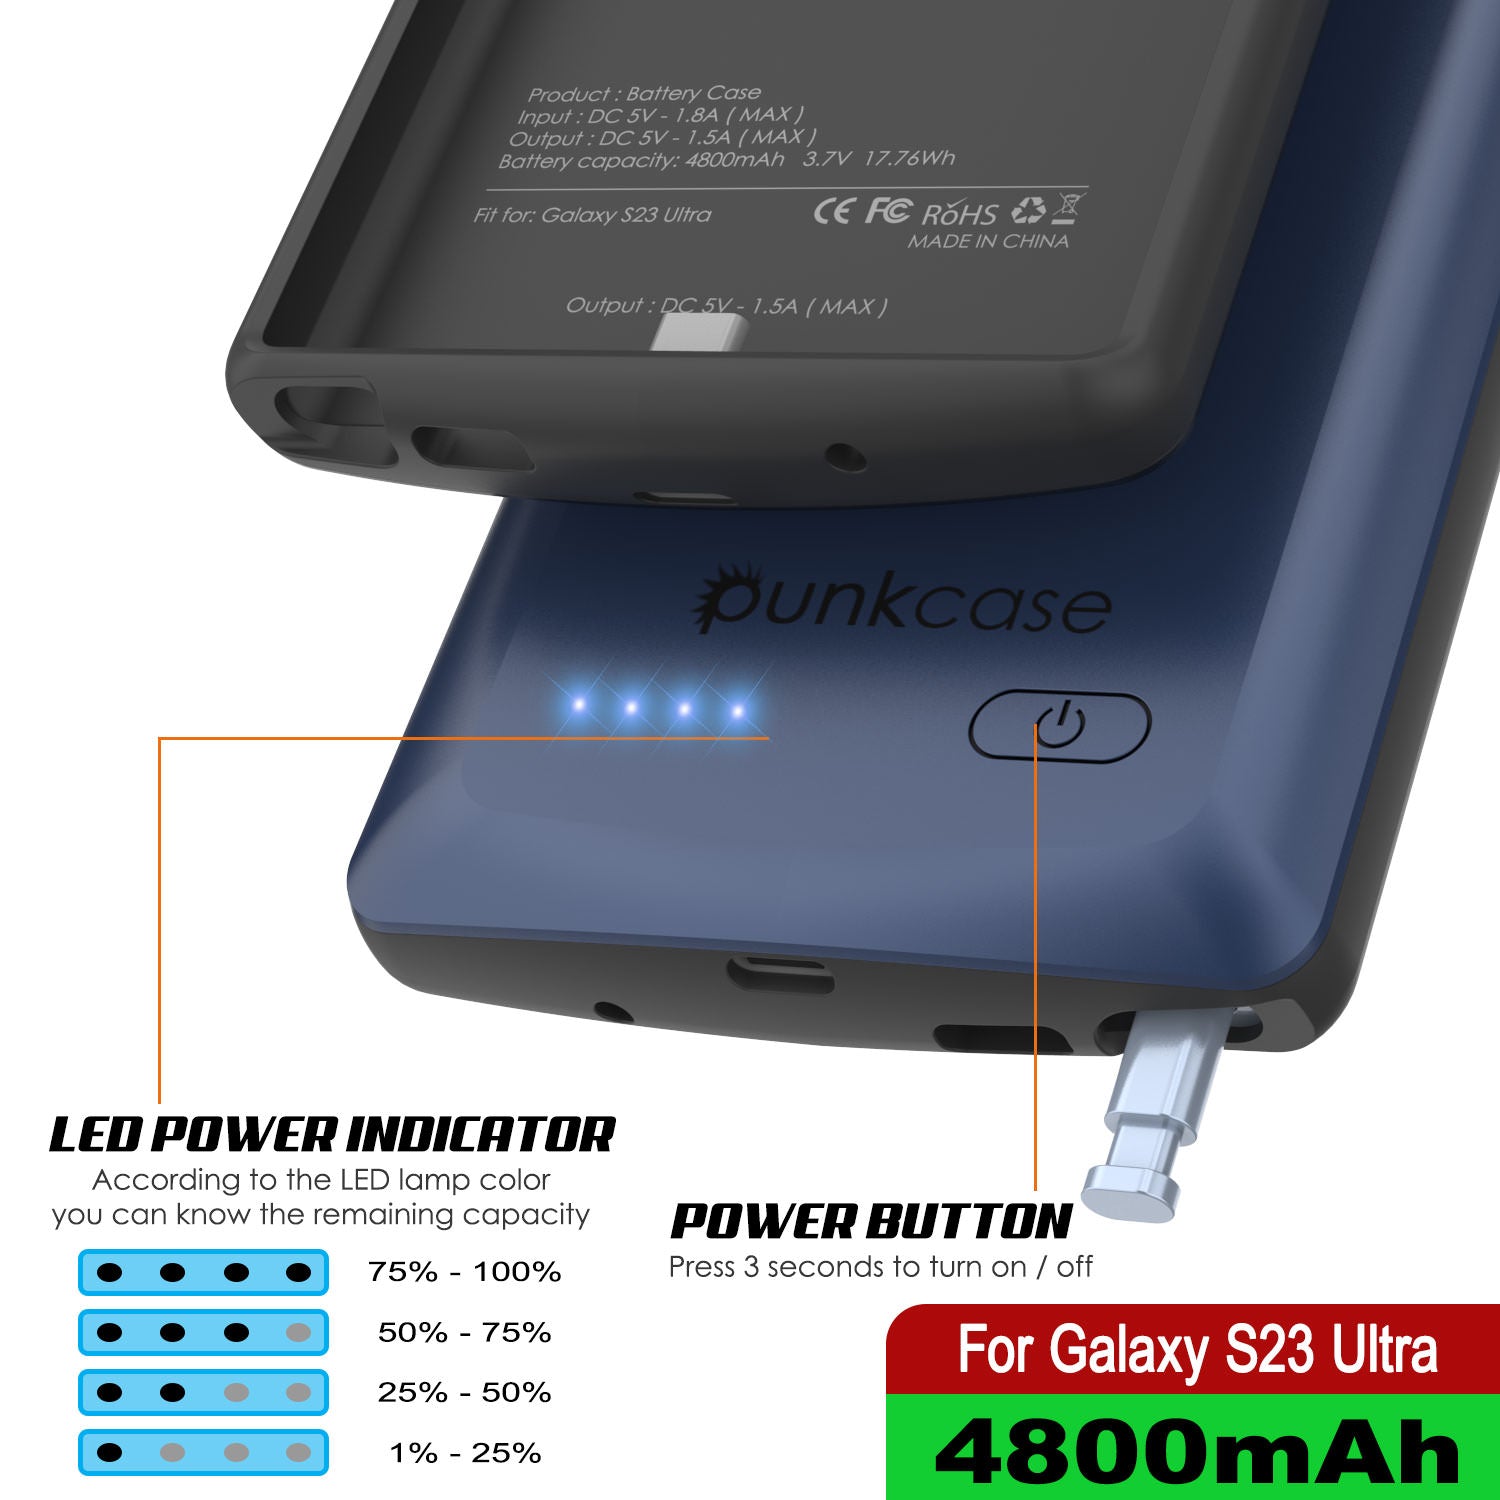 PunkJuice S24 Ultra Battery Case Blue - Portable Charging Power Juice Bank with 4500mAh